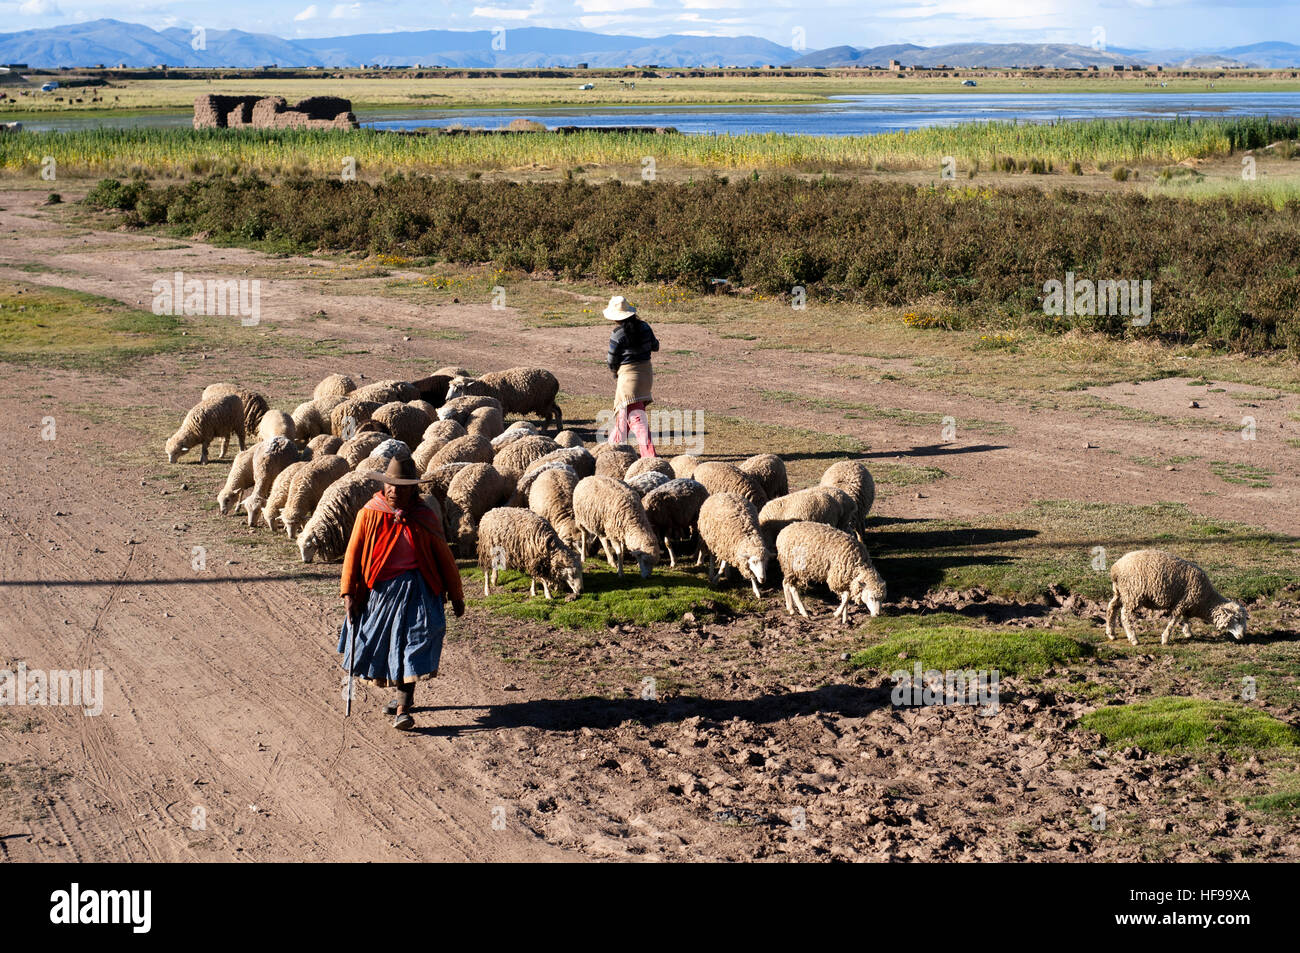 Woman and sheeps in the Peruvian altiplano landscape seen from inside the Andean Explorer train Orient Express which runs between Cuzco and Puno. Alti Stock Photo